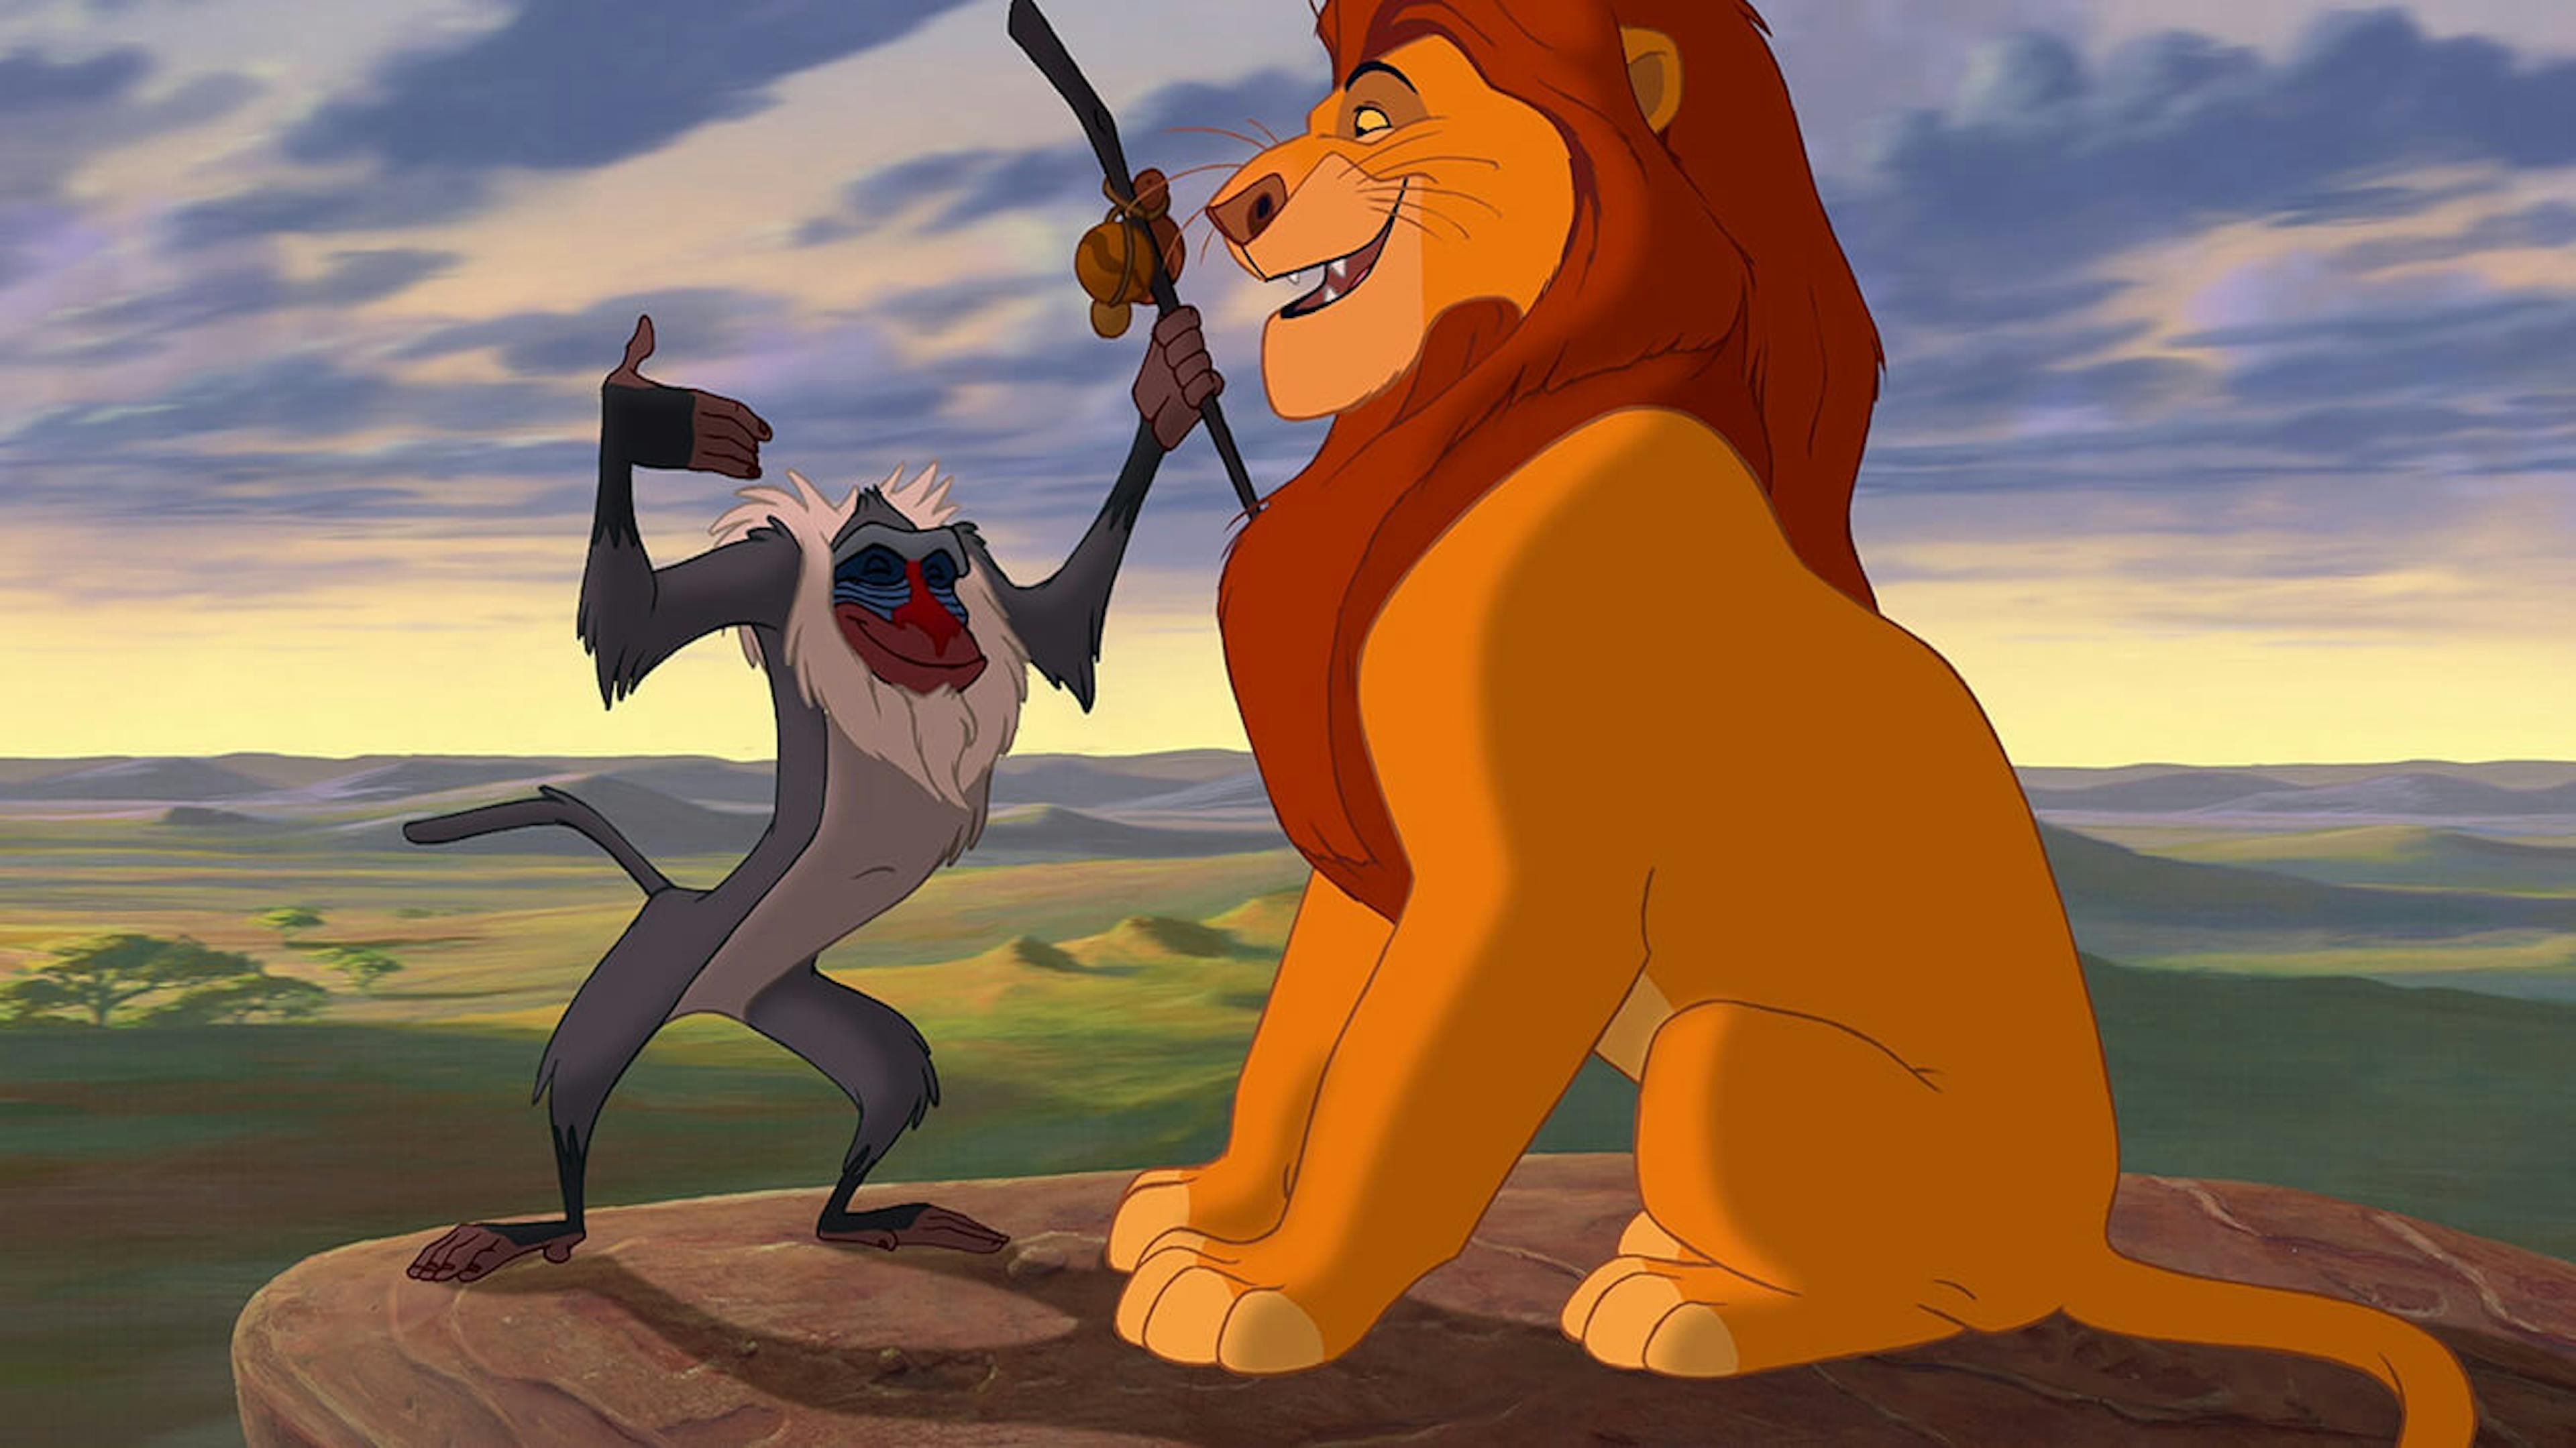 Still from the movie The Lion King